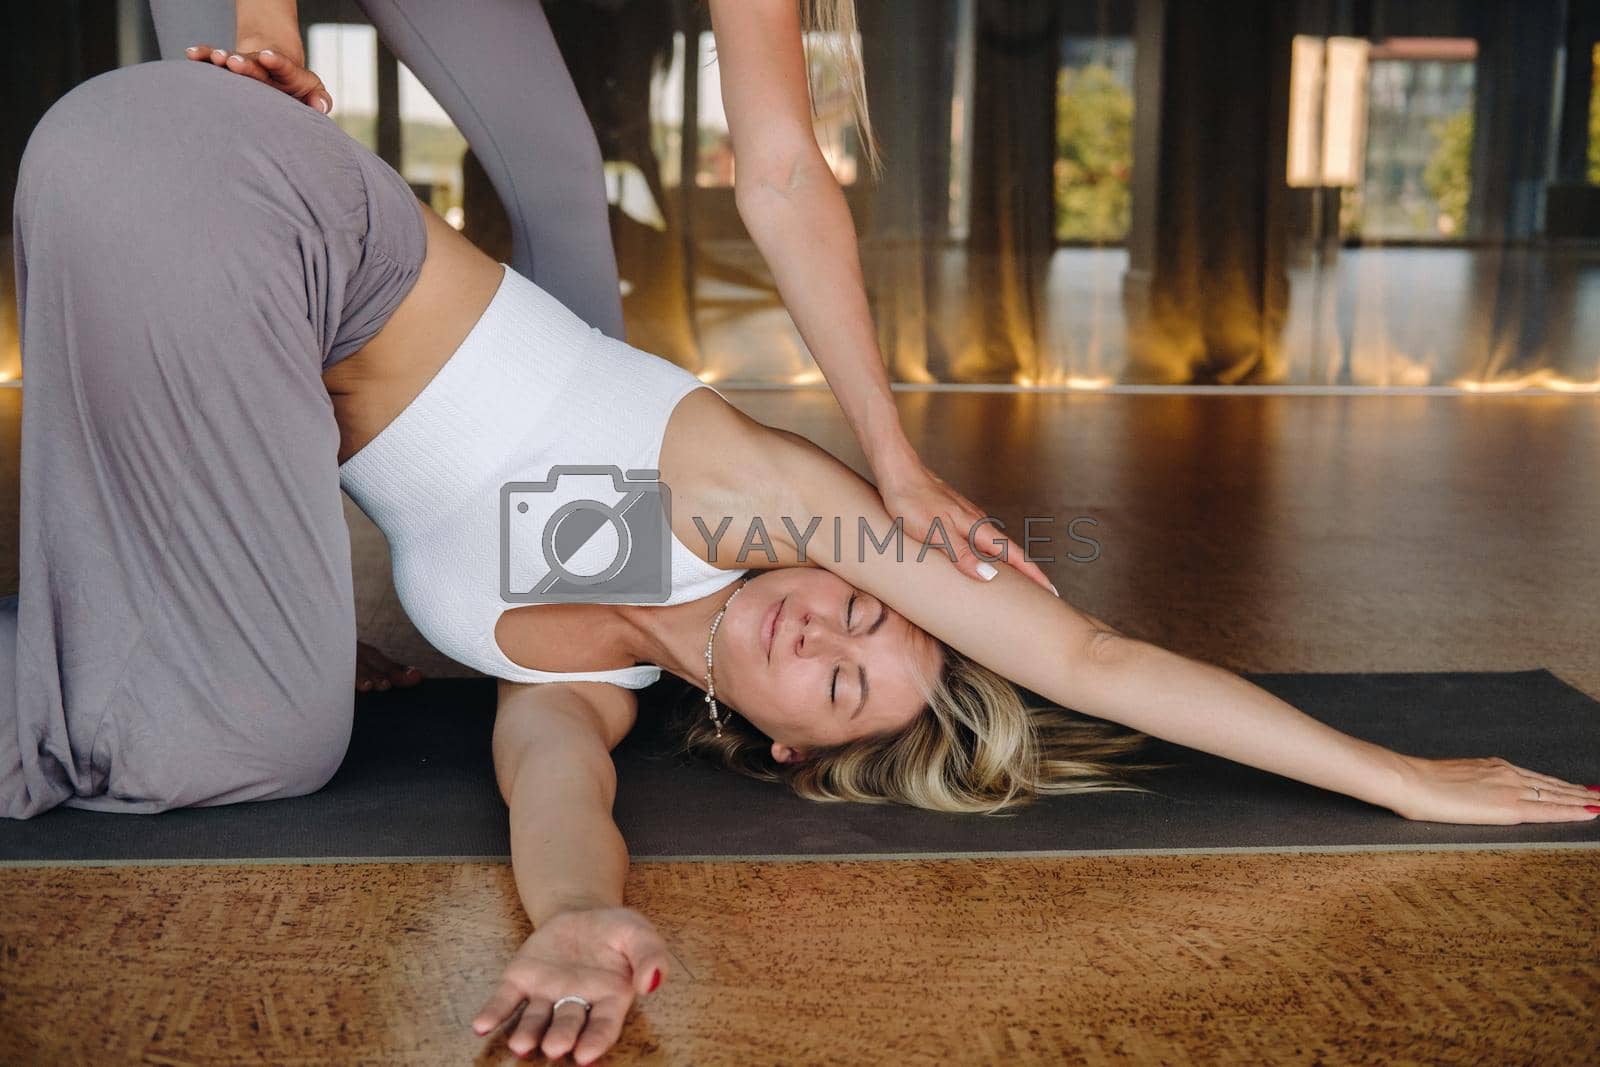 Yoga exercises. A personal trainer teaches a woman yoga classes in the gym.